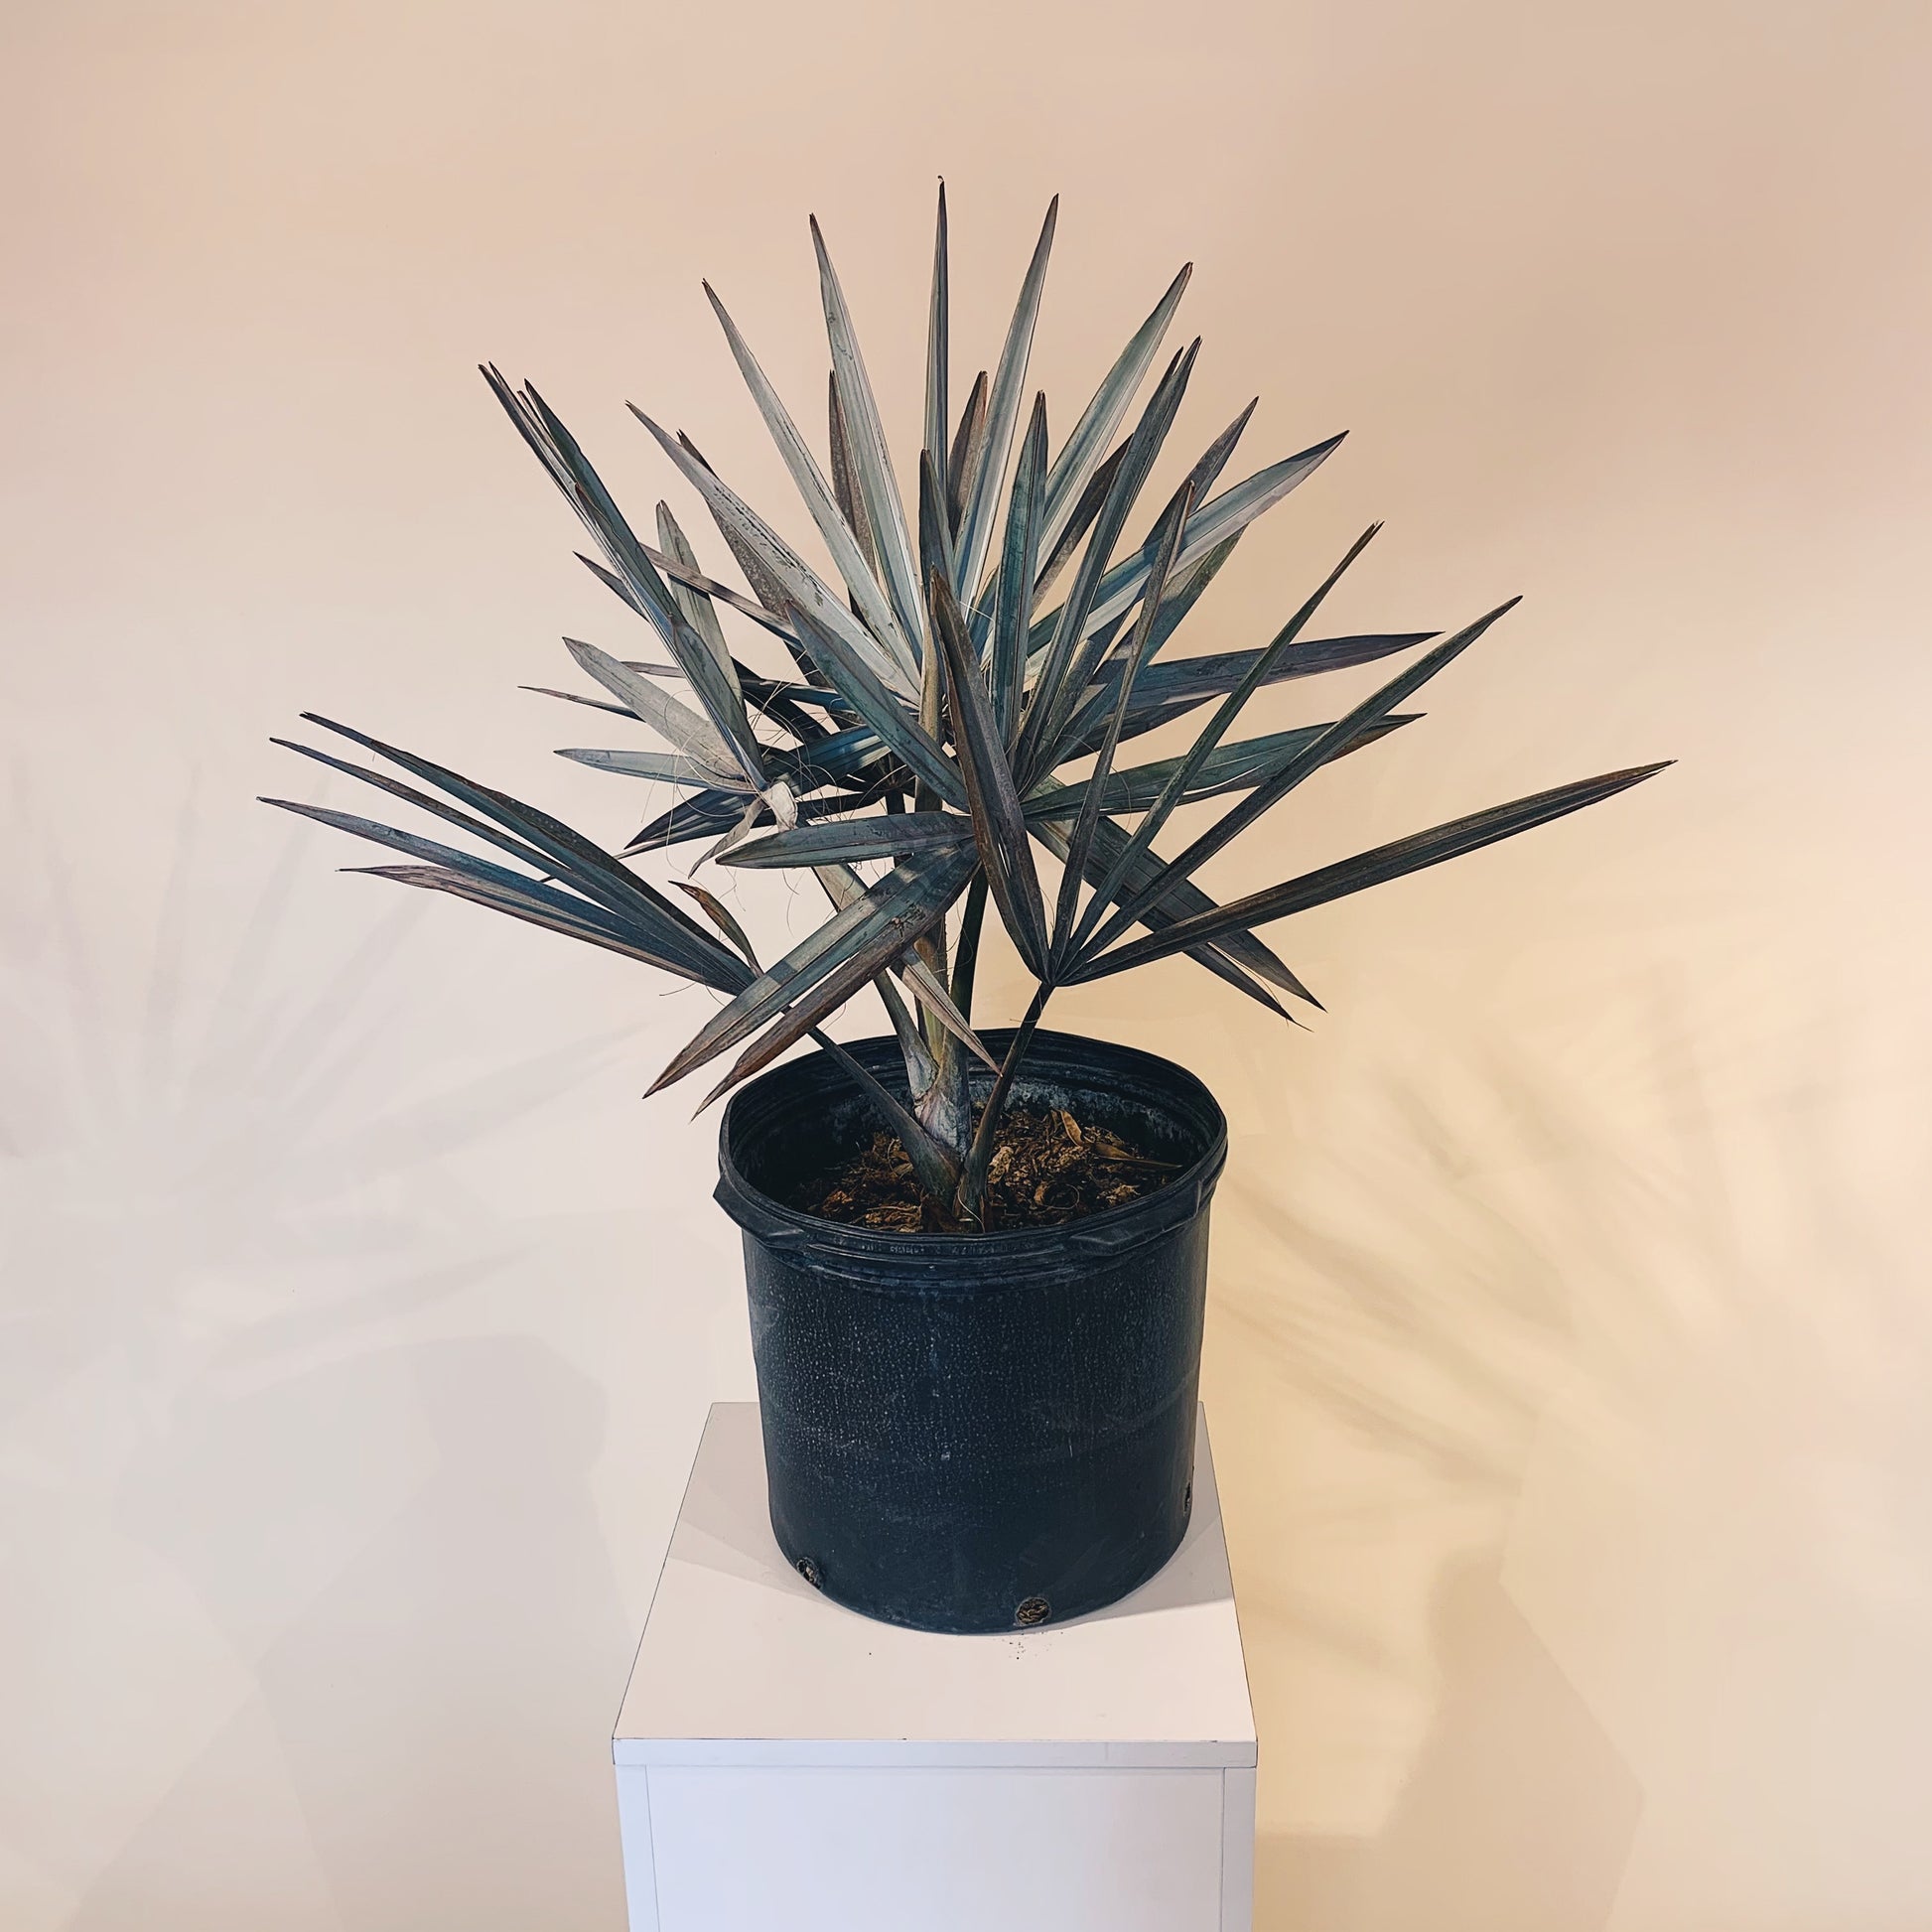 Silver Fan Palm (Bismarckia nobilis) in a 14 inch pot. Indoor plant for sale by Promise Supply for delivery and pickup in Toronto